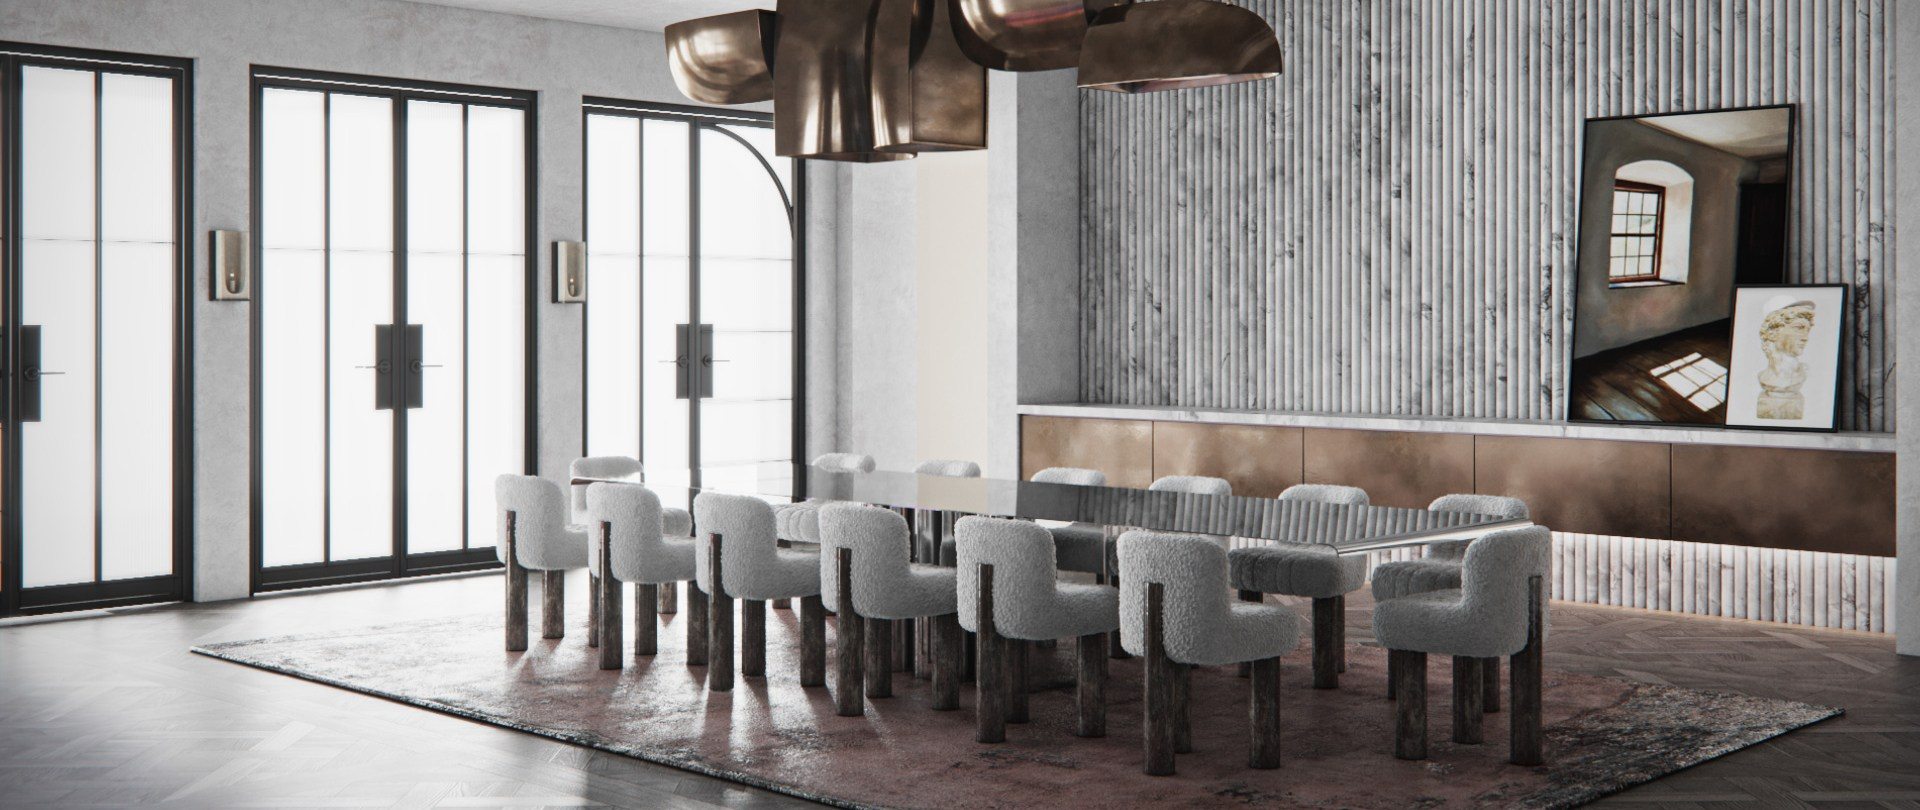 3D Interior Rendering of the Dining Room Designed by Nina Magon